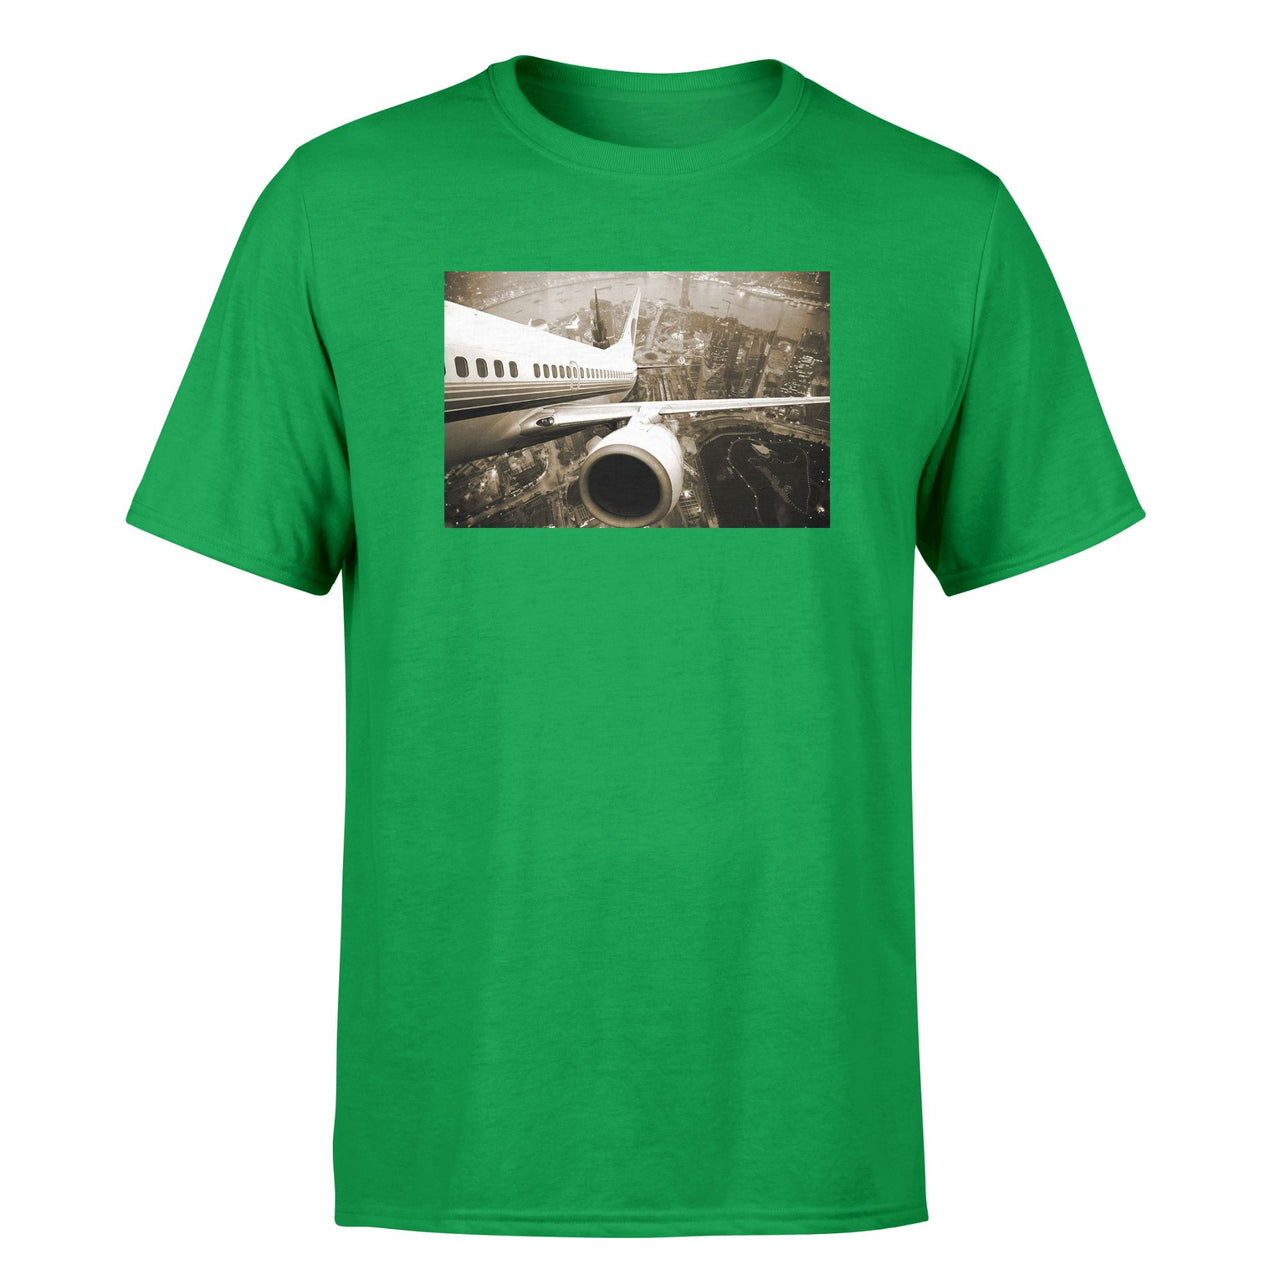 Departing Aircraft & City Scene behind Designed T-Shirts